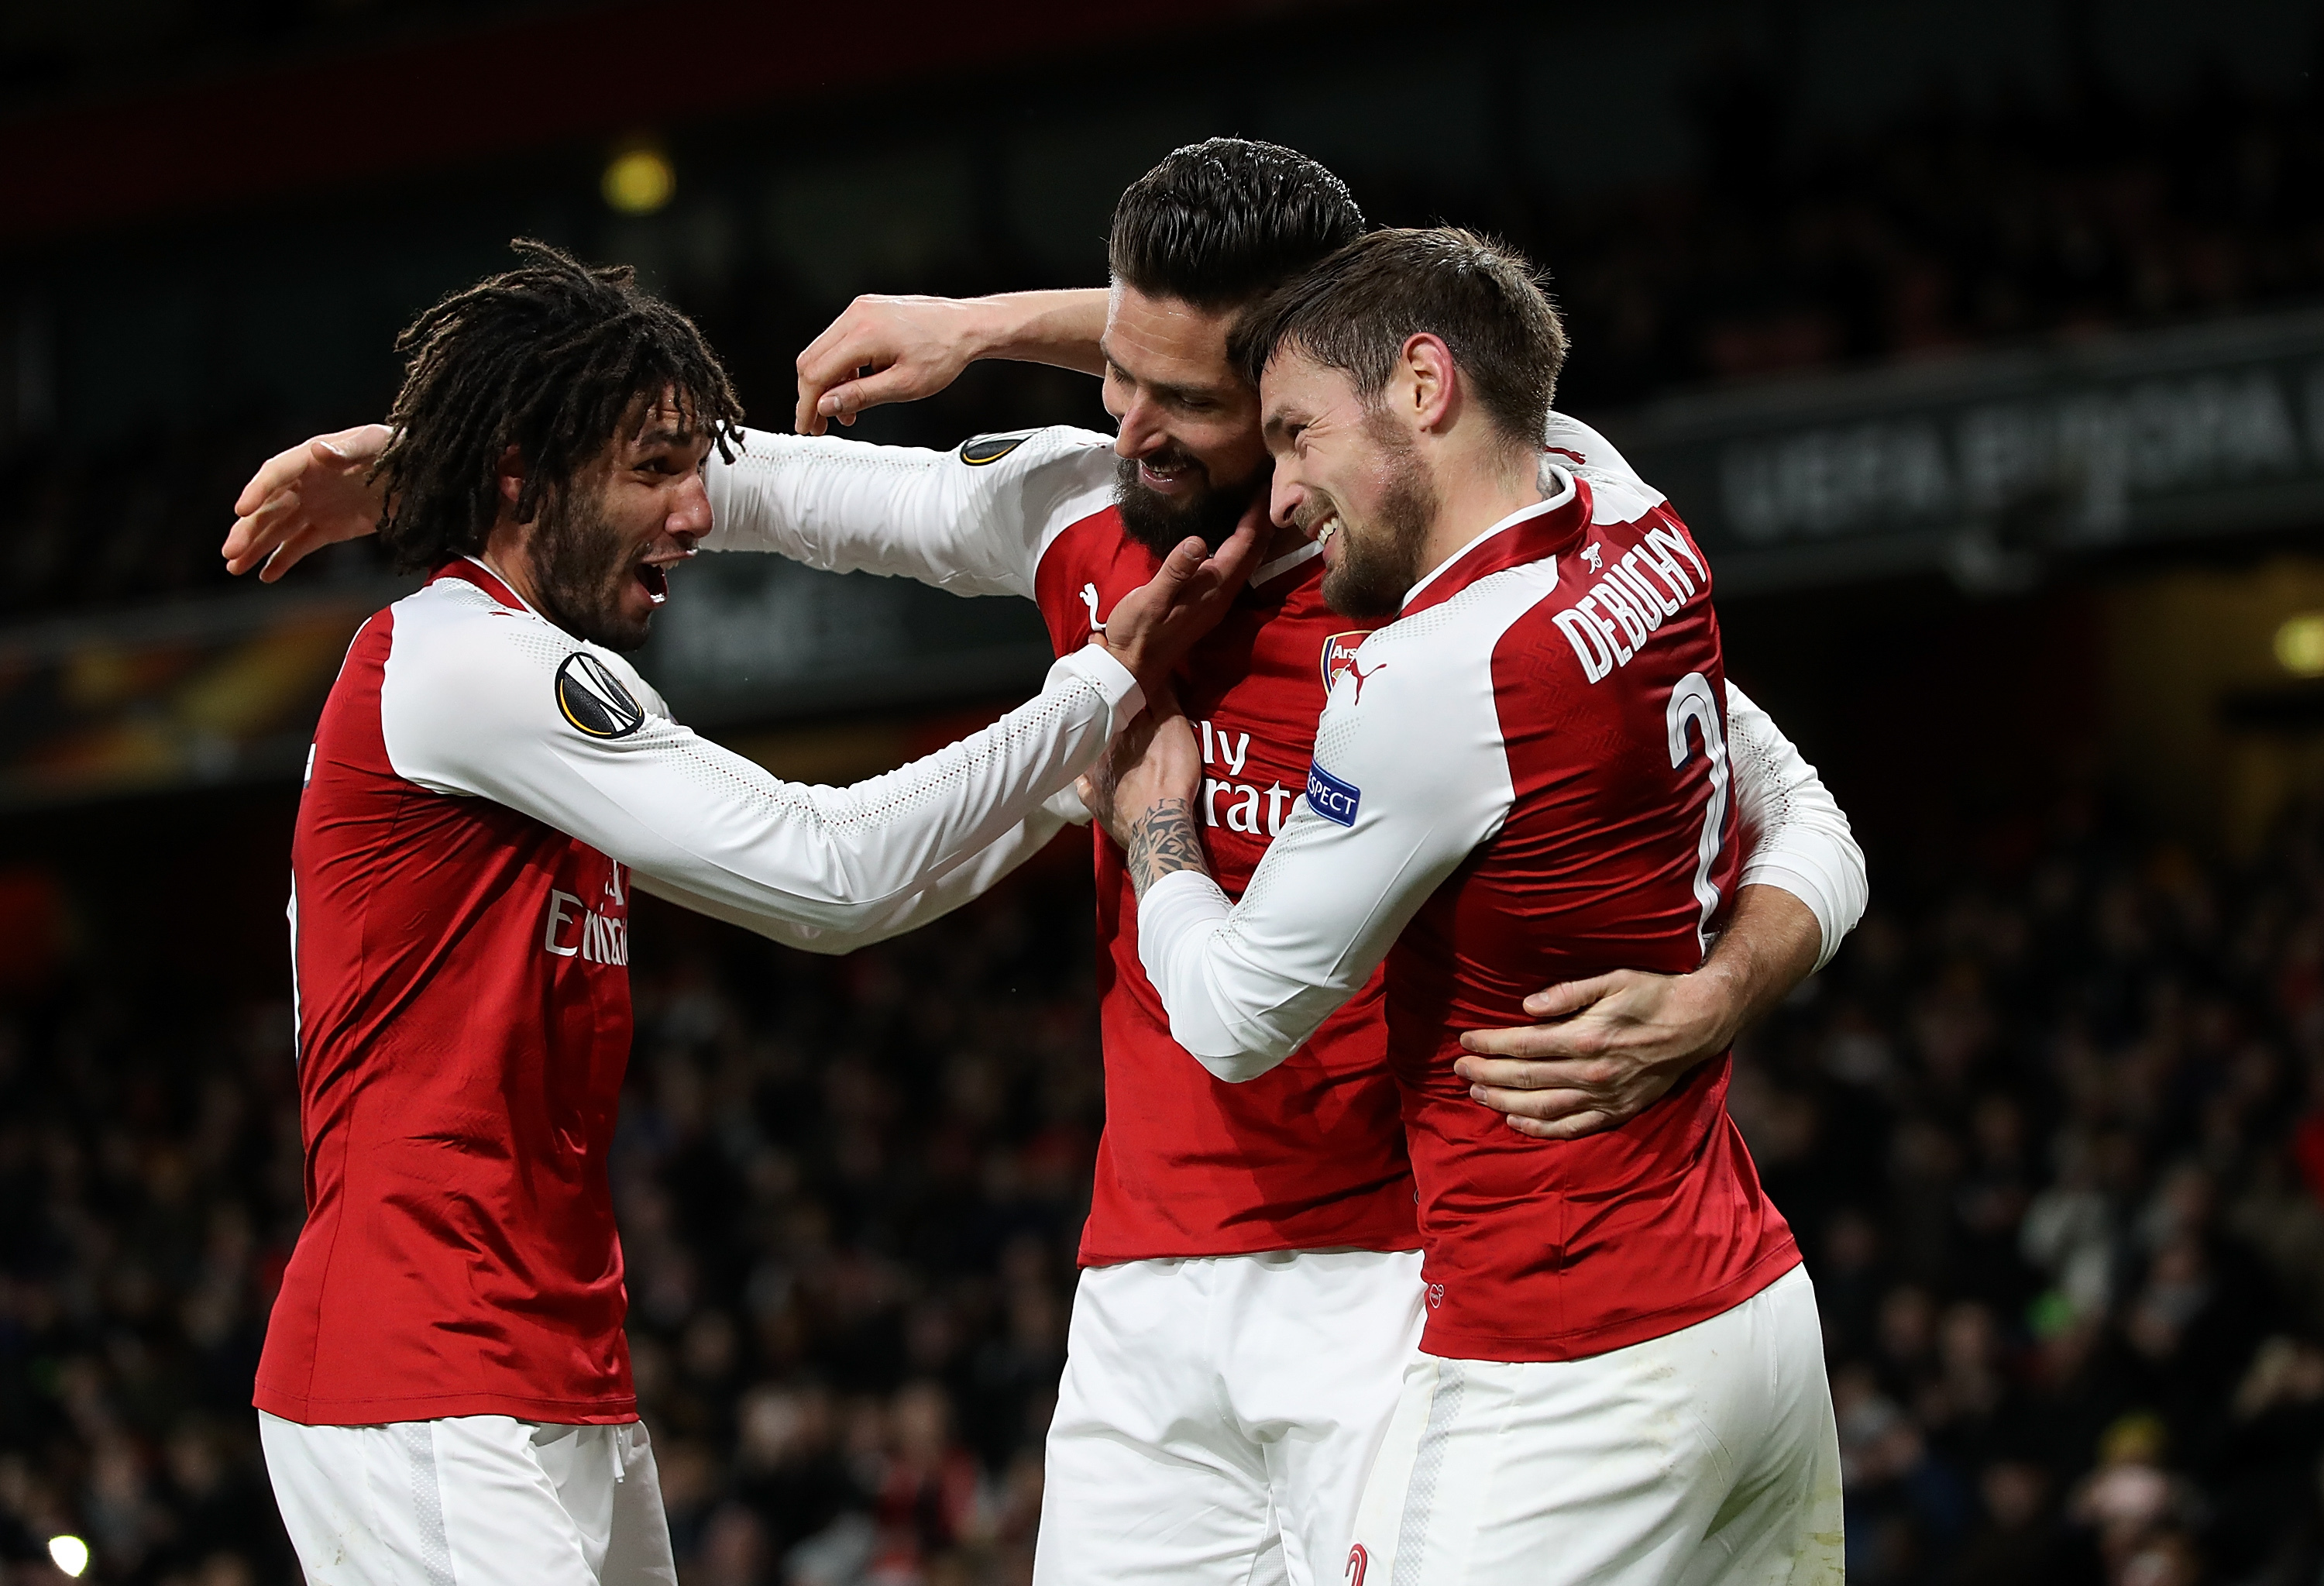 Arsenal players celebrate (Matthew Lewis/Getty Images)